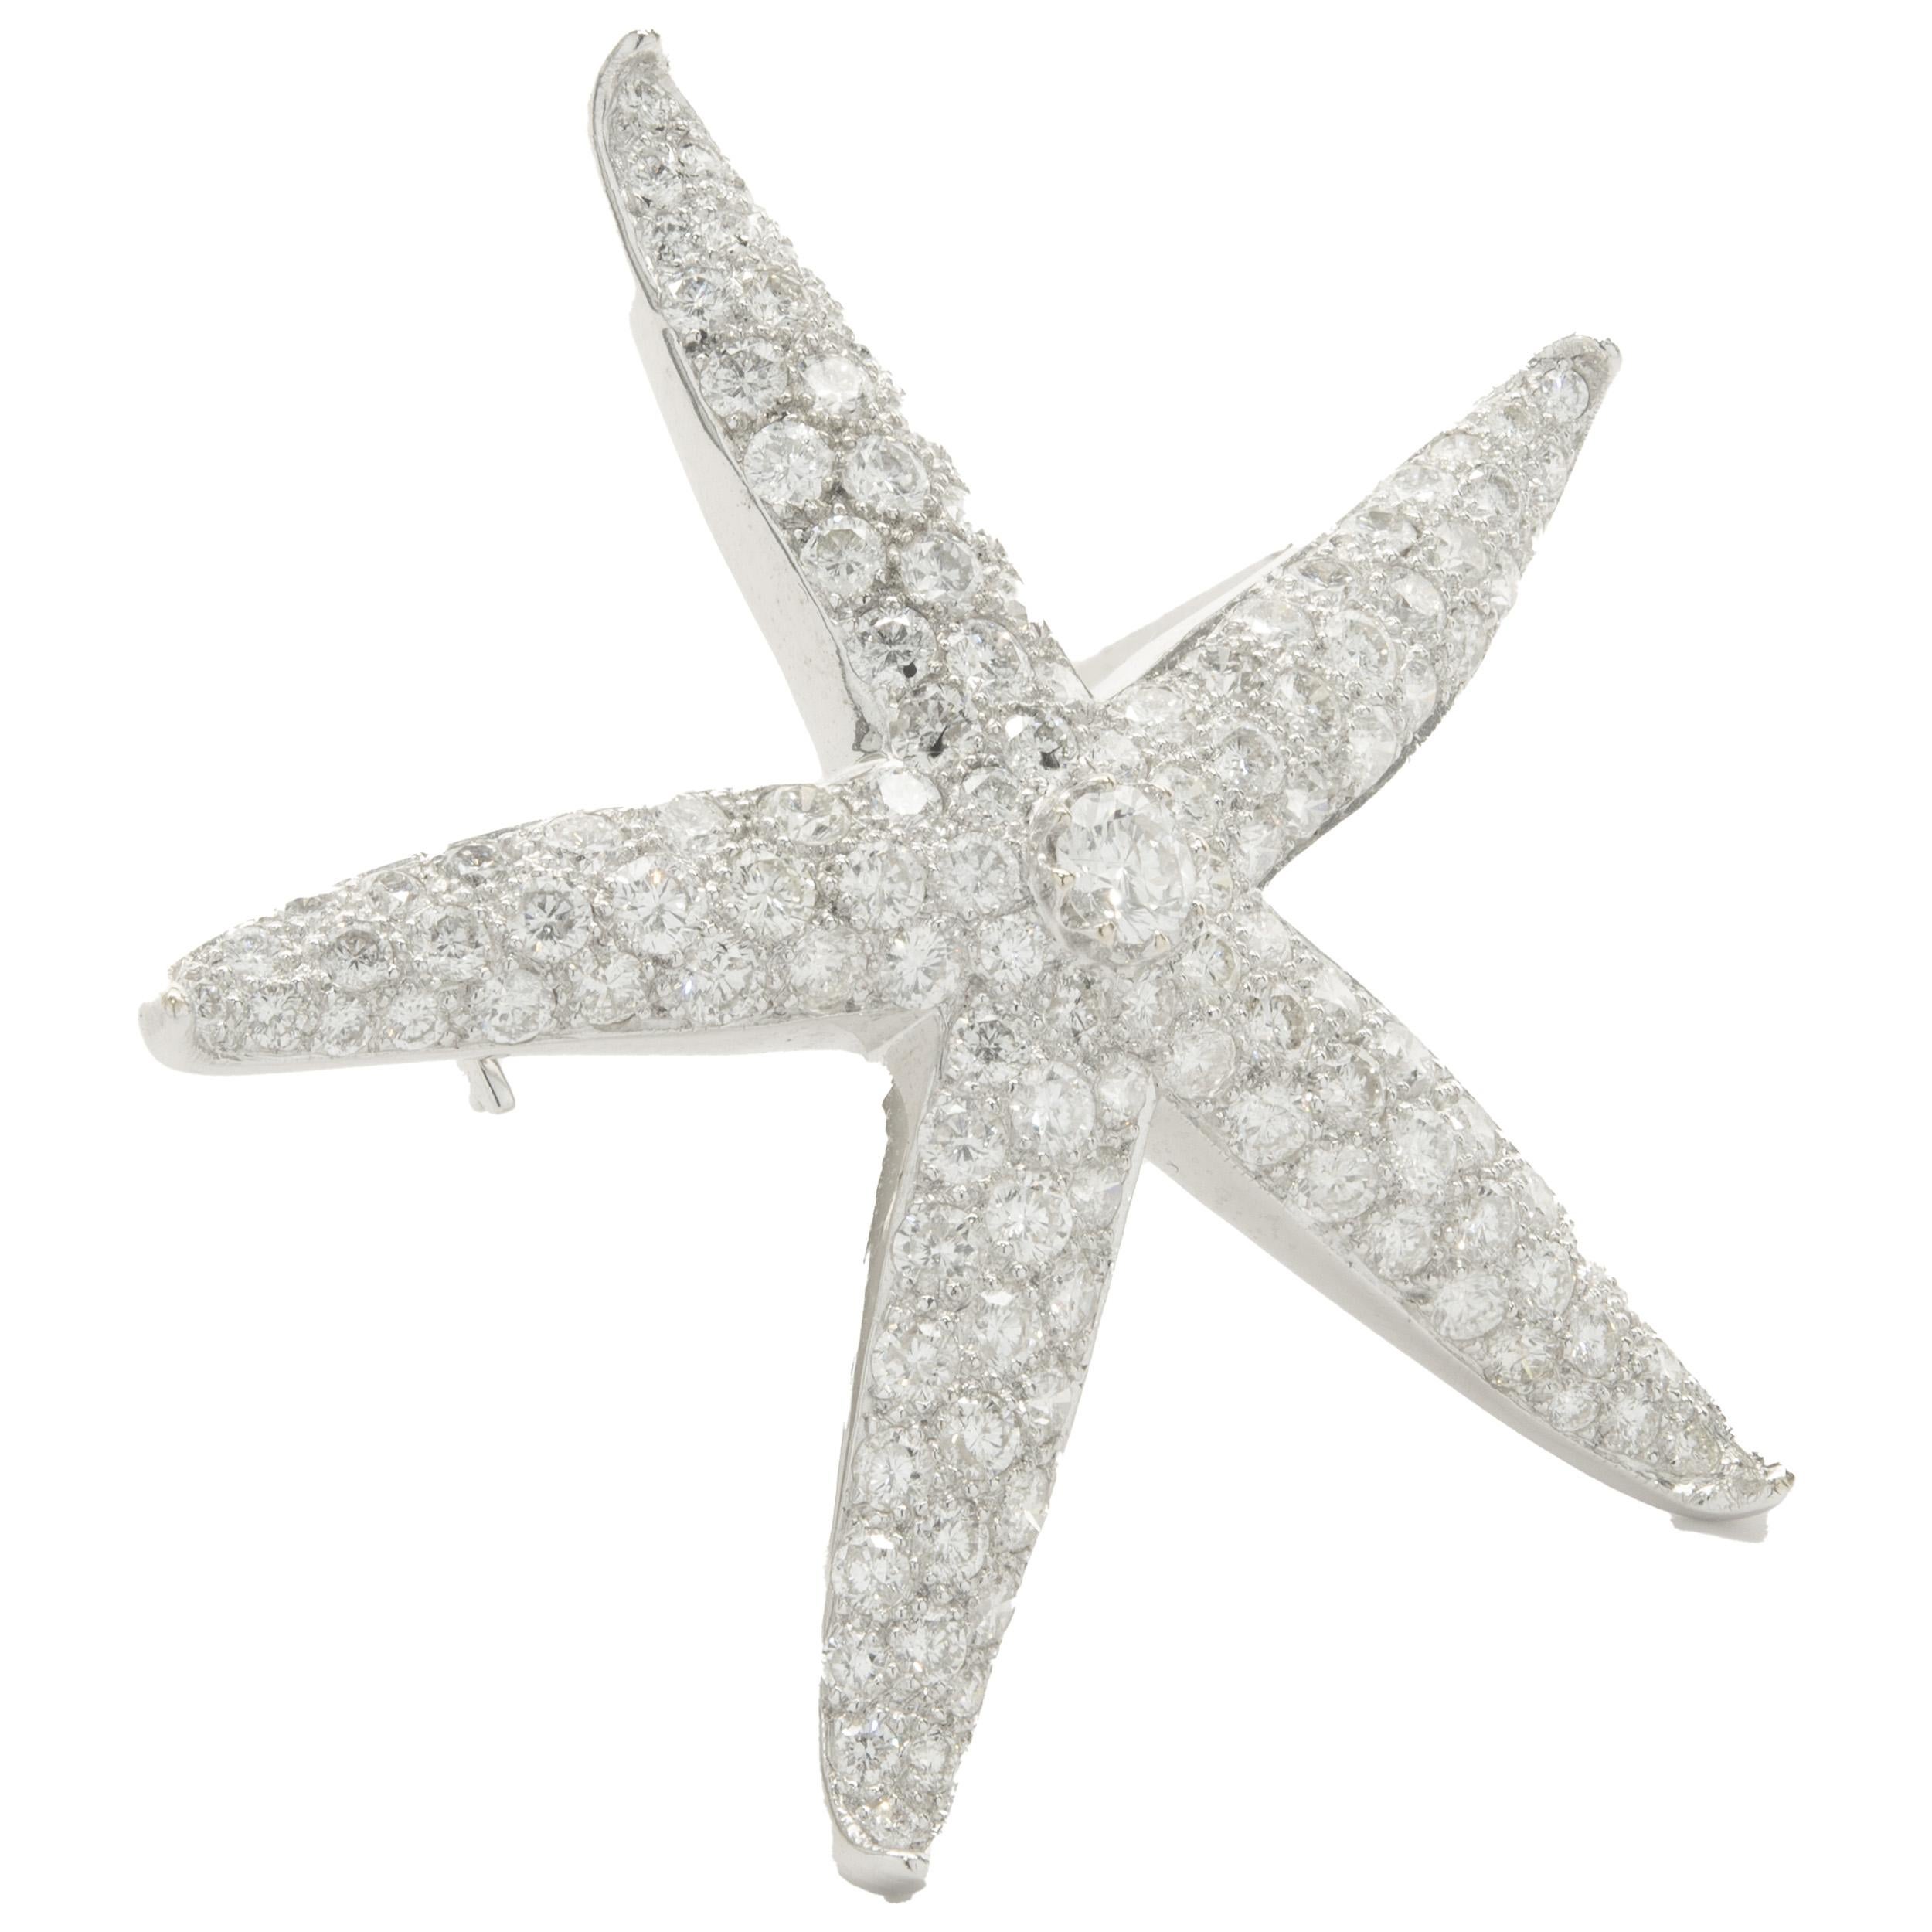 18 Karat White Gold Pave Diamond Starfish Pin In Excellent Condition For Sale In Scottsdale, AZ